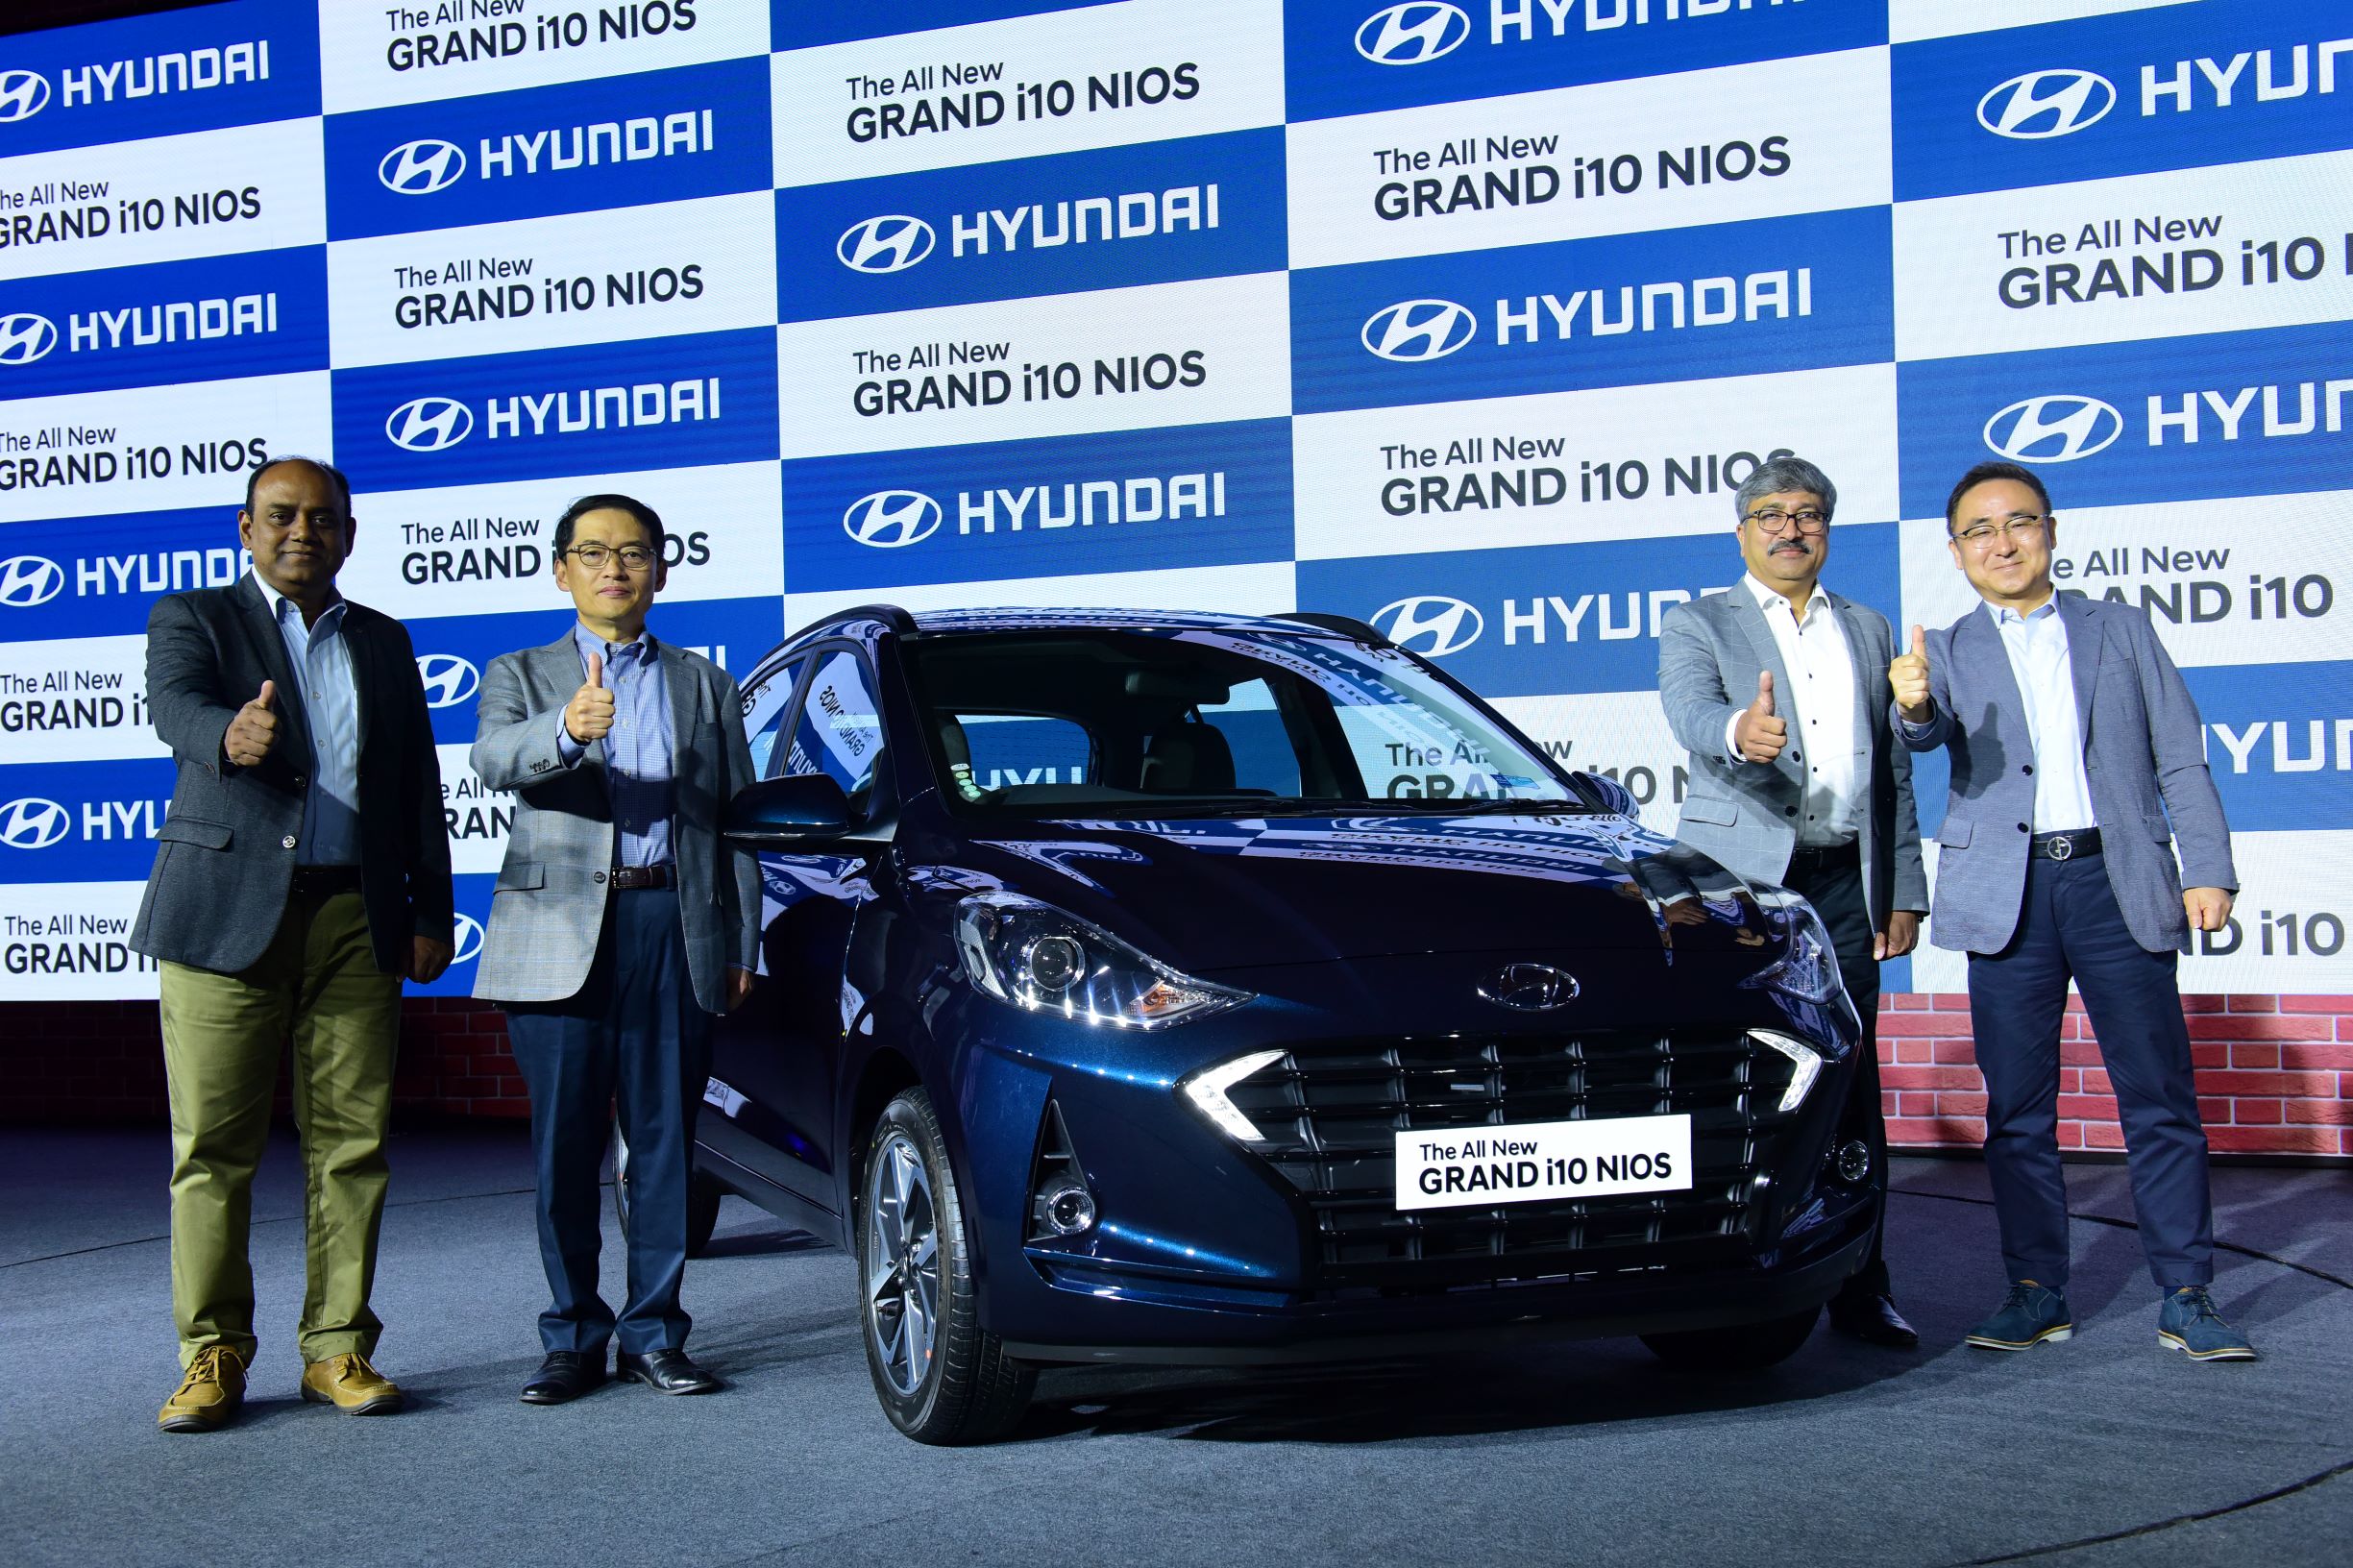 (L to R) Mr. S.S. Kim, MD & CEO, HMIL and Mr. S Punnaivanam, Vice President – National Service, HMIL along with Mr. S J Ha, ED- Sales & Marketing, HMIL and Mr. Vikas Jain, National Sales Head, HMIL at the Launch of Hyundai The GRAND i10 NIOS in New Delhi.- Photo By GPN